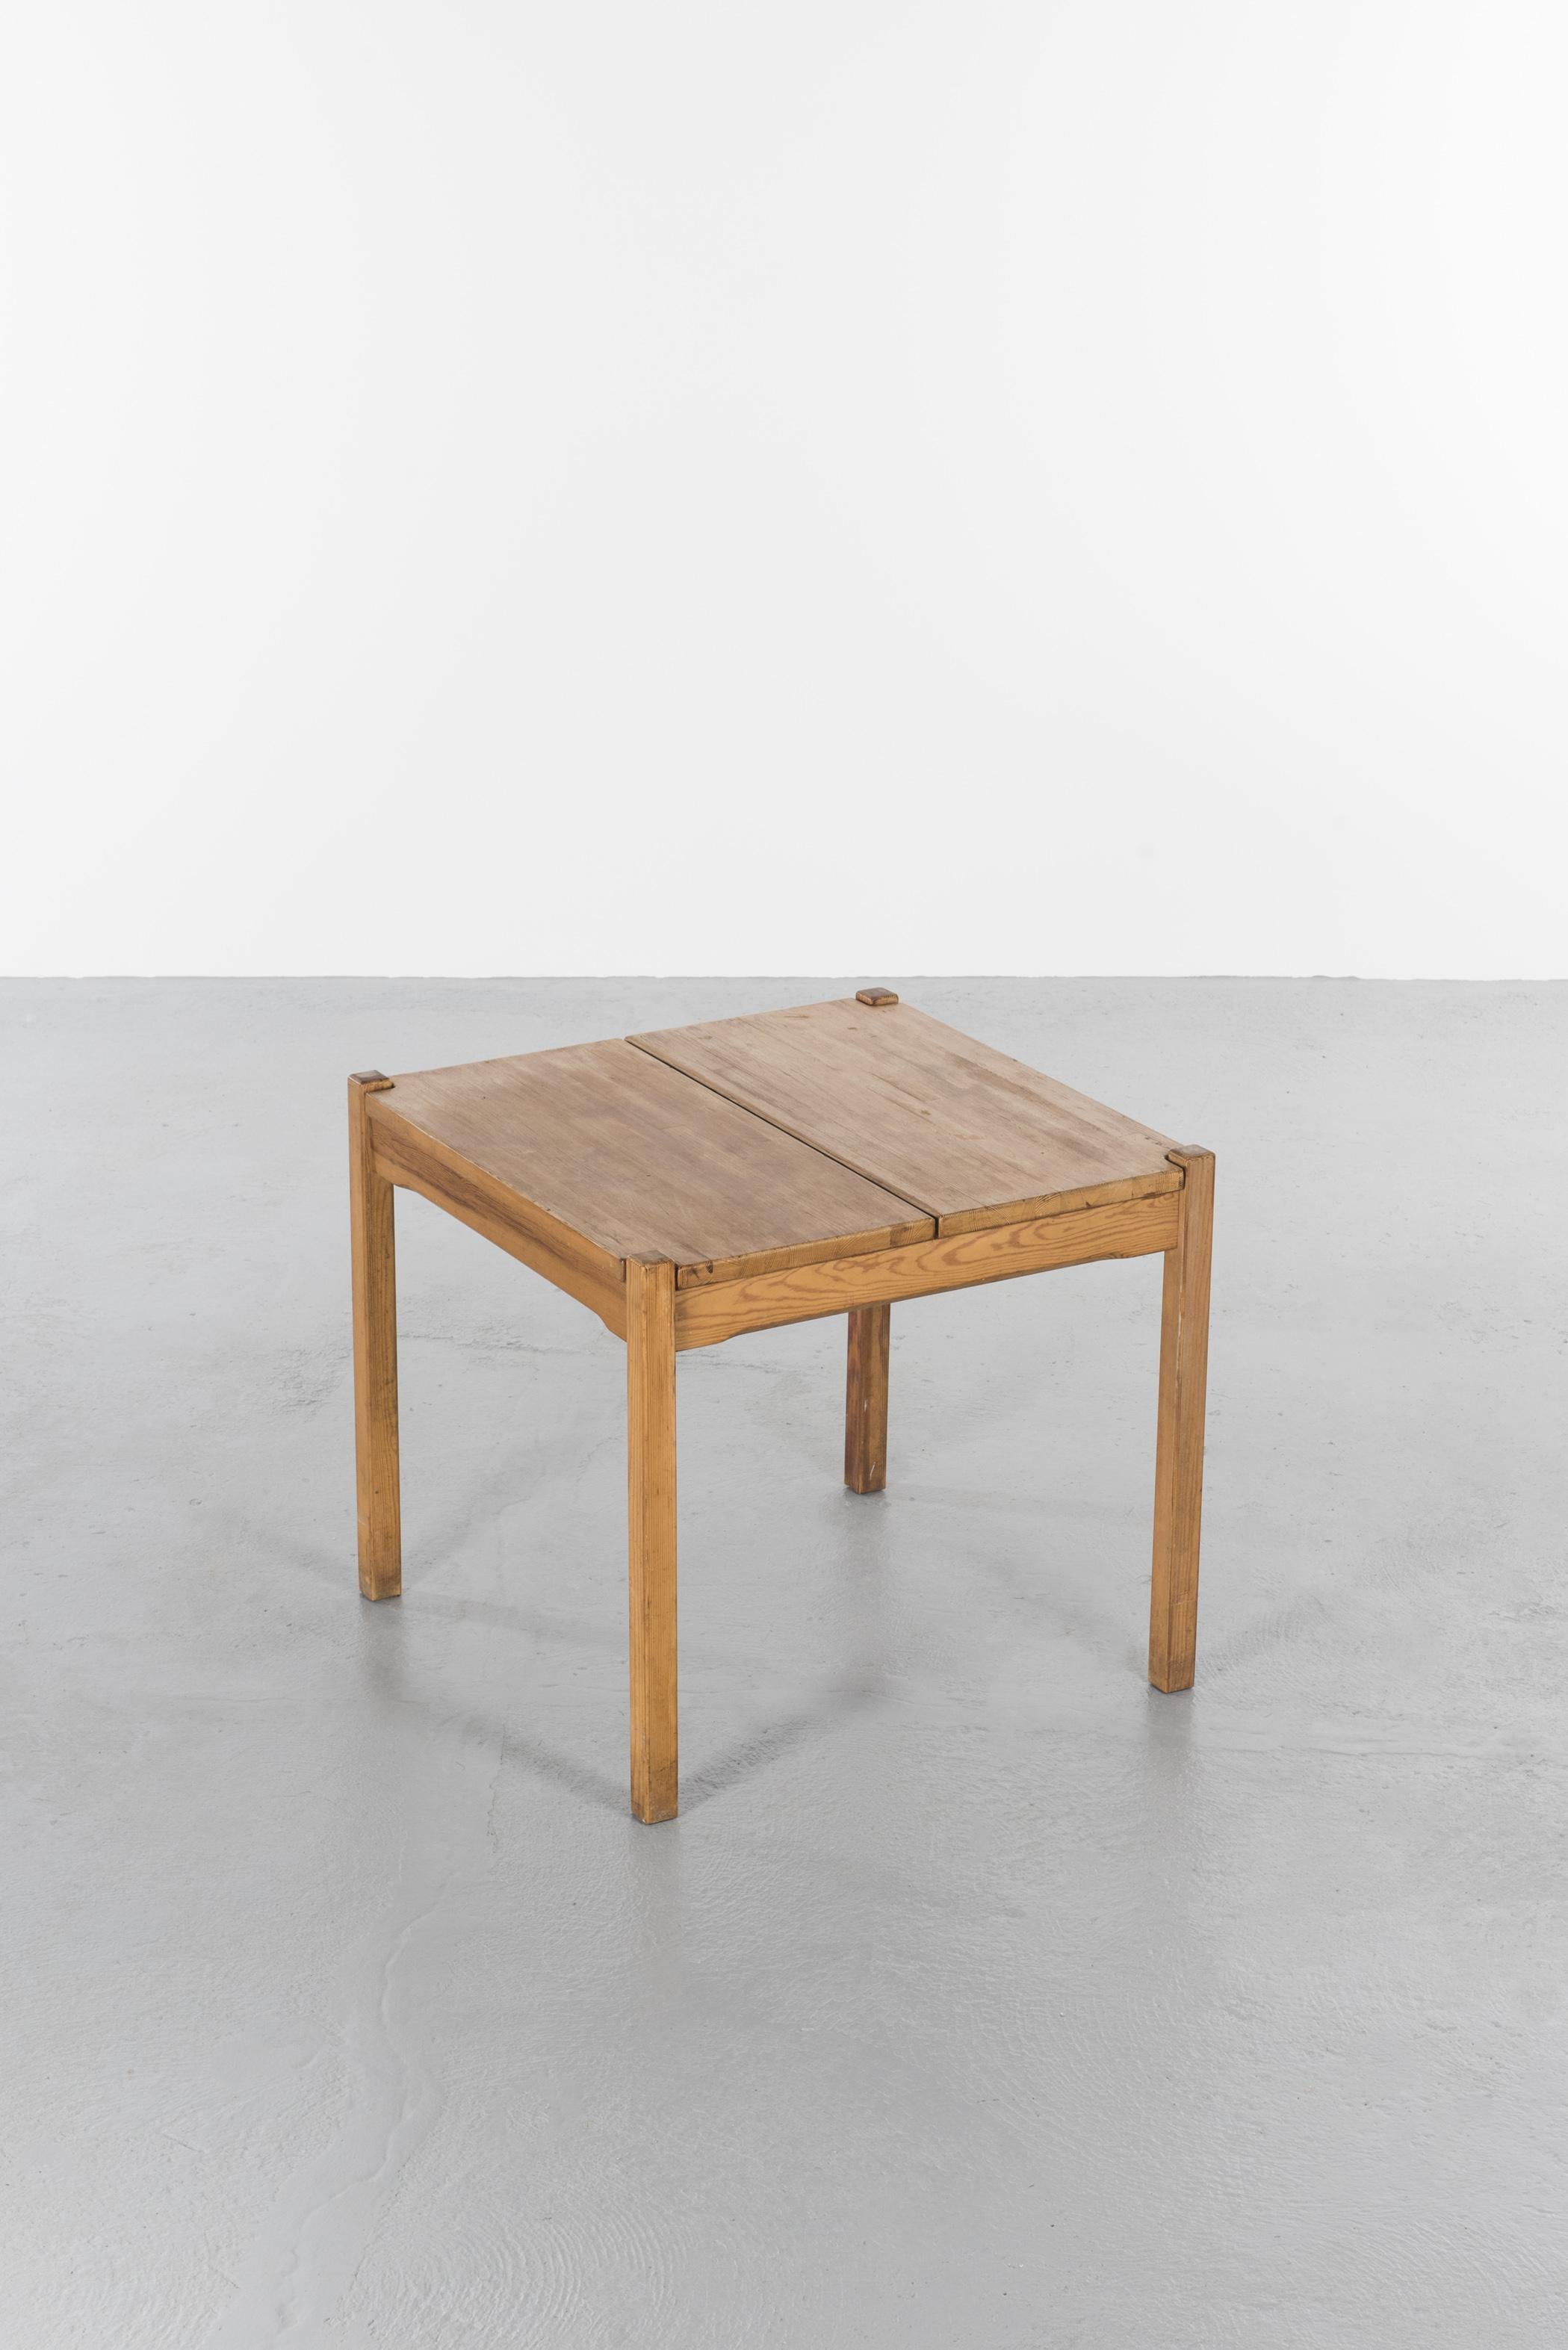 Occasional square, low table in pine by Finnish designer Ilmari Tapiovaara, manufactured by Laukaan Pu, 1960s.
Table in 2 rectangular pieces of wood and 4 feet, typical of Tapiovaara’s functional and minimalistic table designs.

About the